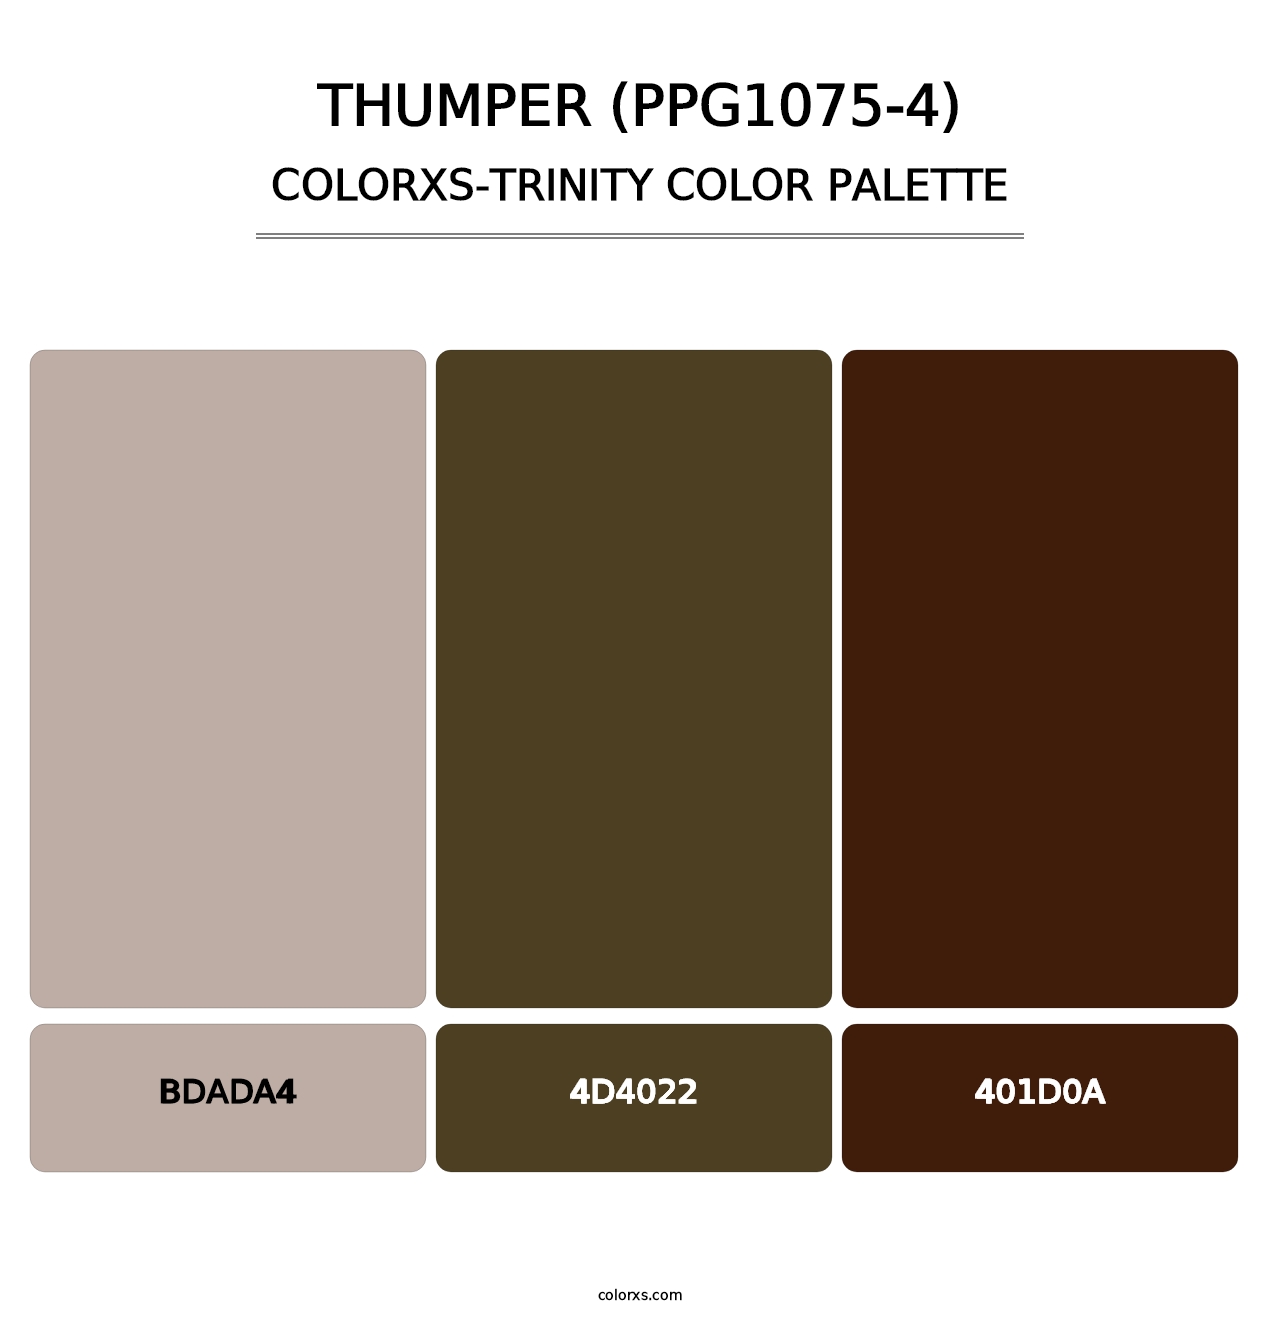 Thumper (PPG1075-4) - Colorxs Trinity Palette